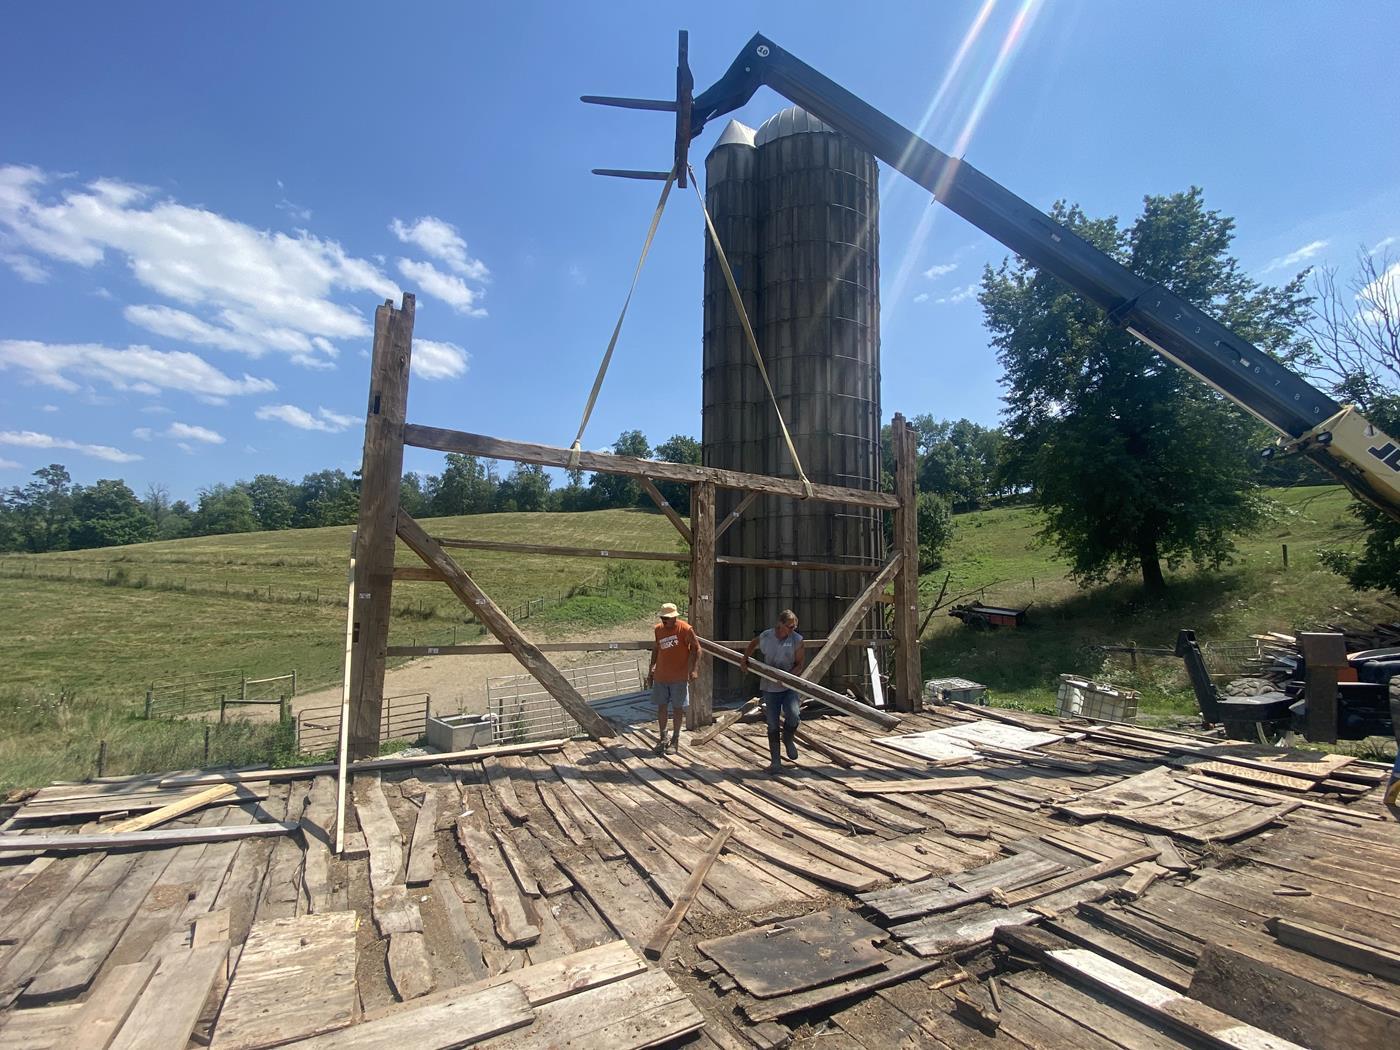 https://www.ohiovalleybarnsalvage.com/images/Beachy Historic Ohio Barn Frame - Your Source For Sawn Barn Timbers